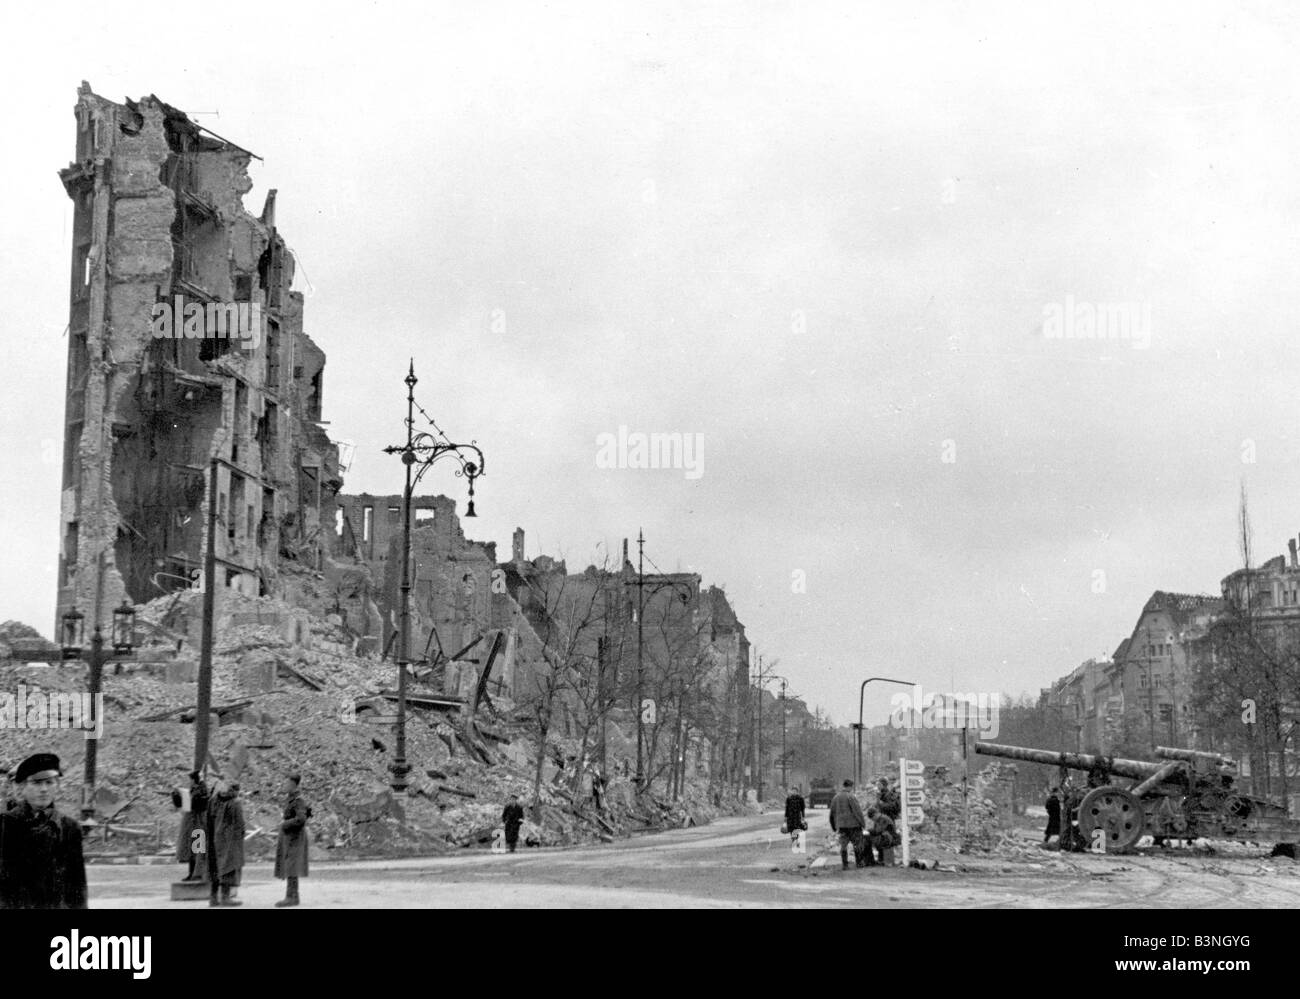 BERLIN 1945  Bombed ruins in the city Stock Photo